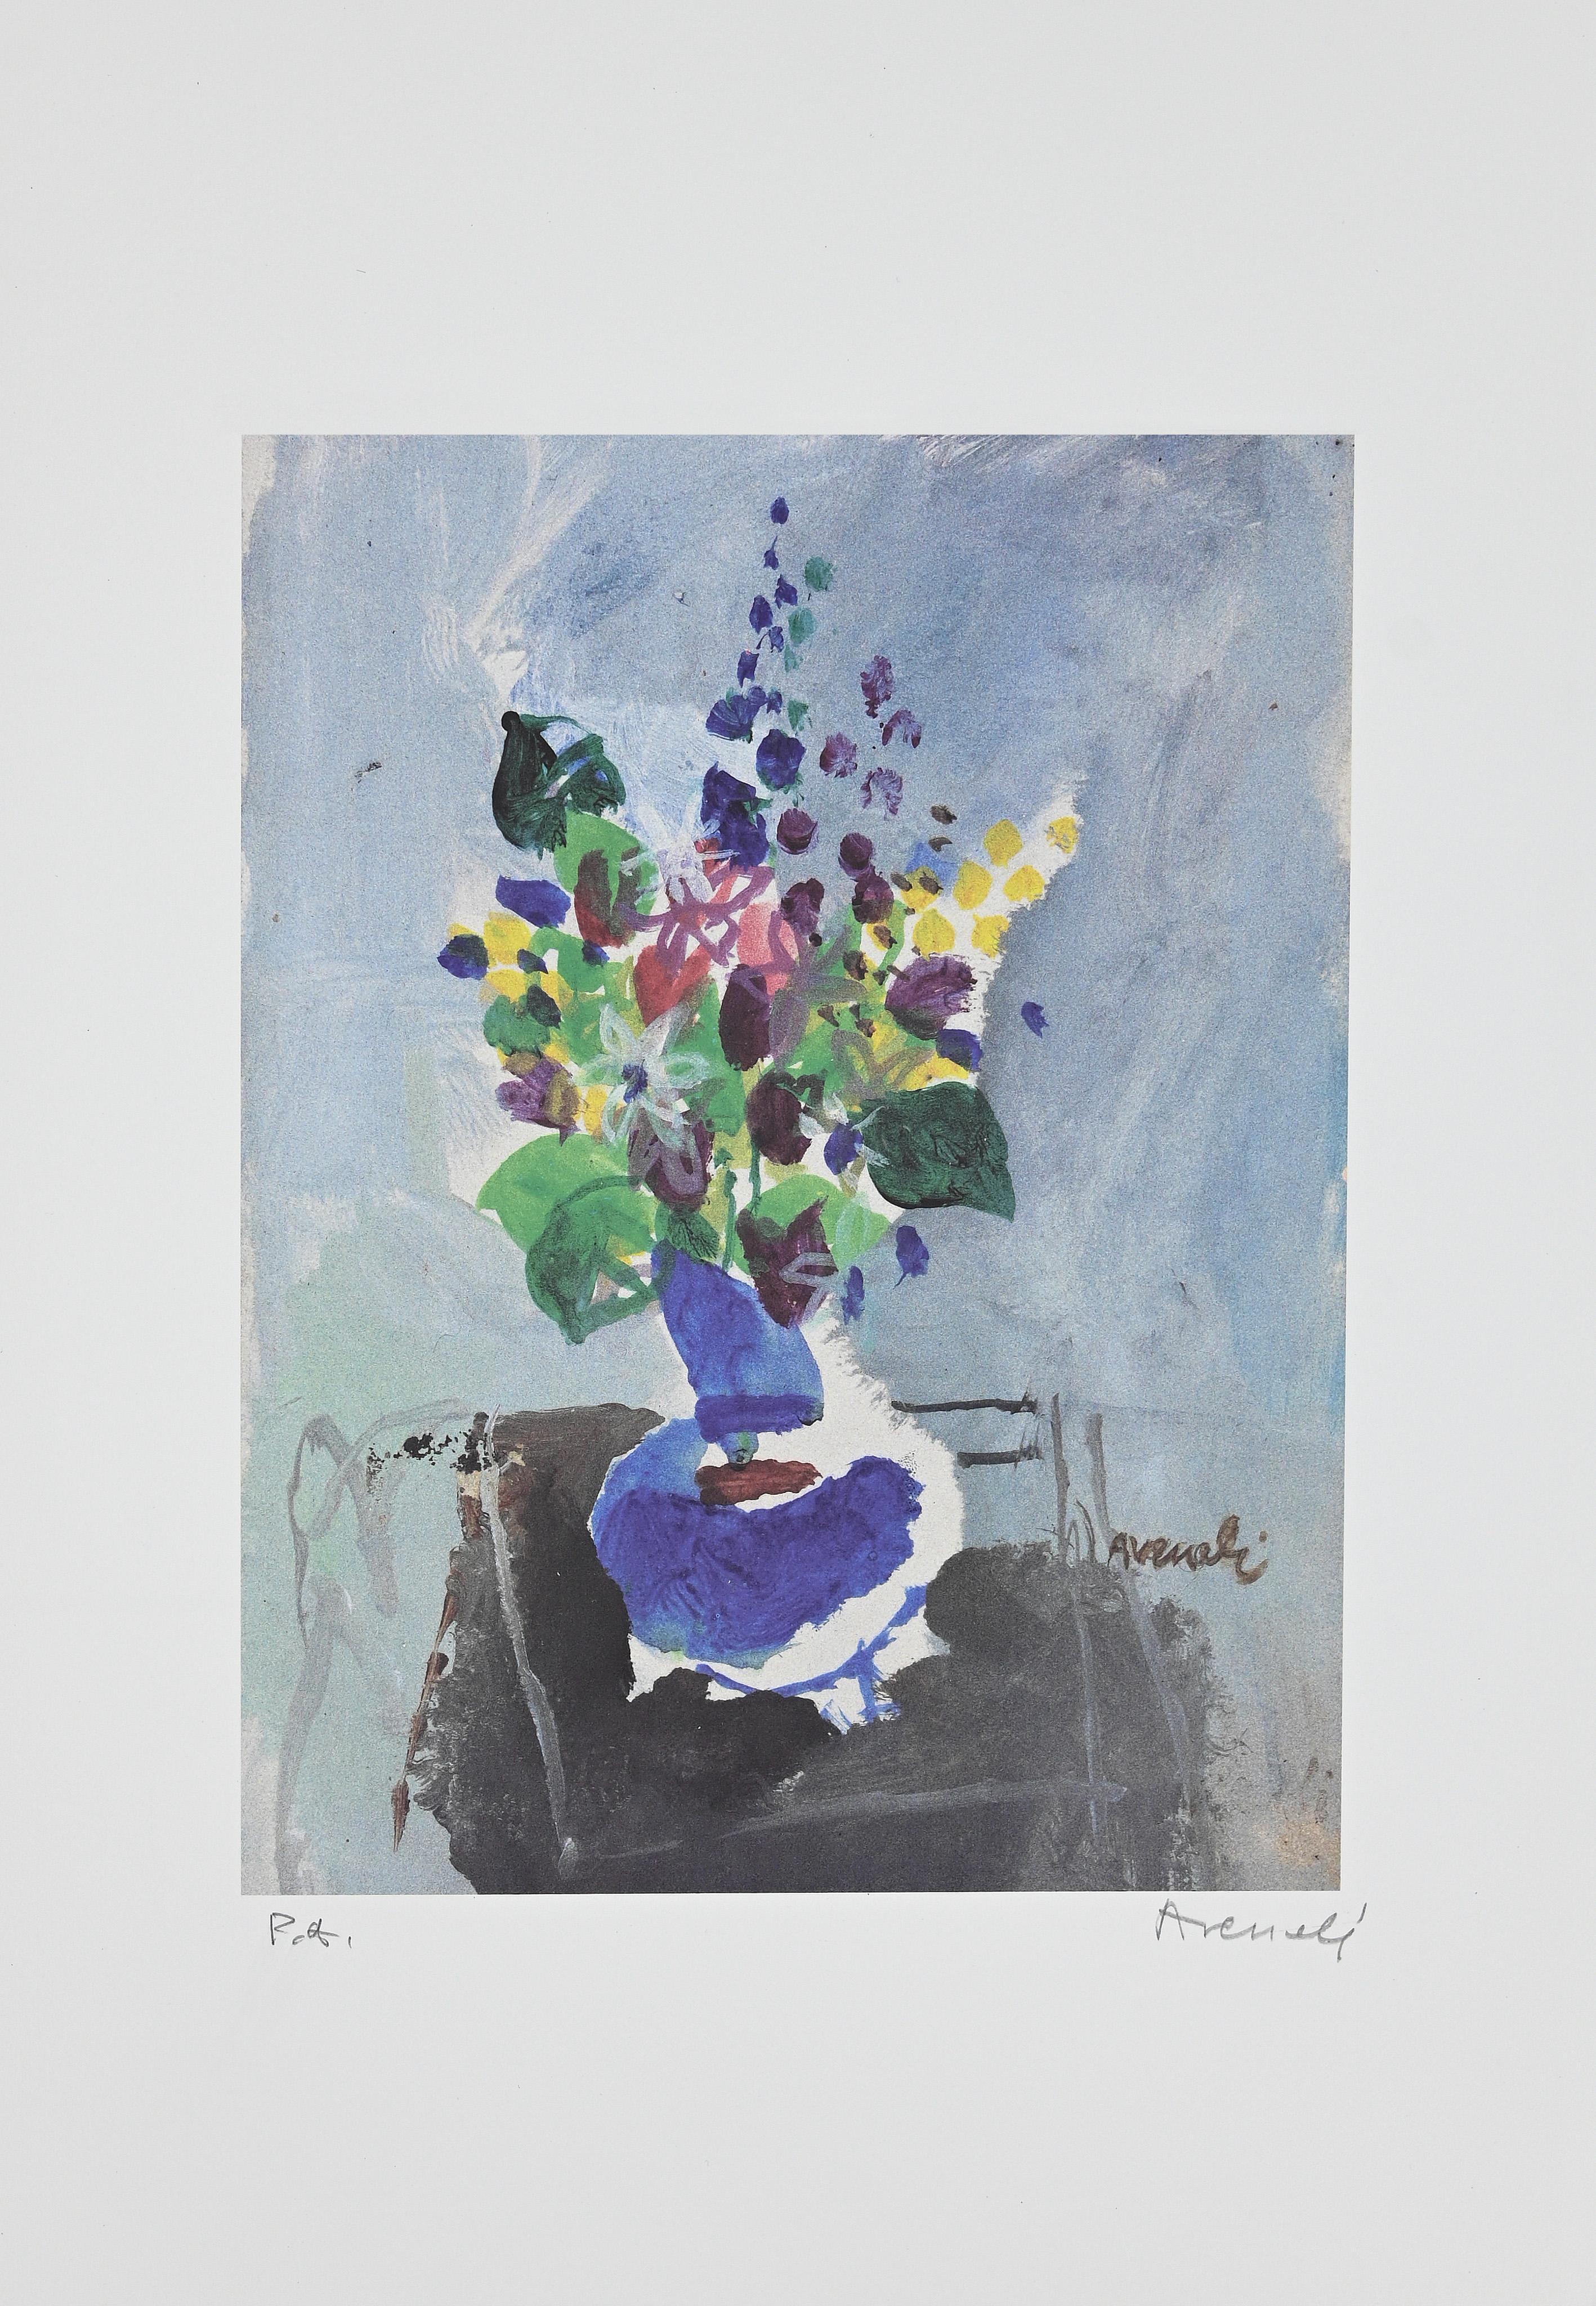 Vase of Flowers - Original Lithograph by M. Avenali - 1950